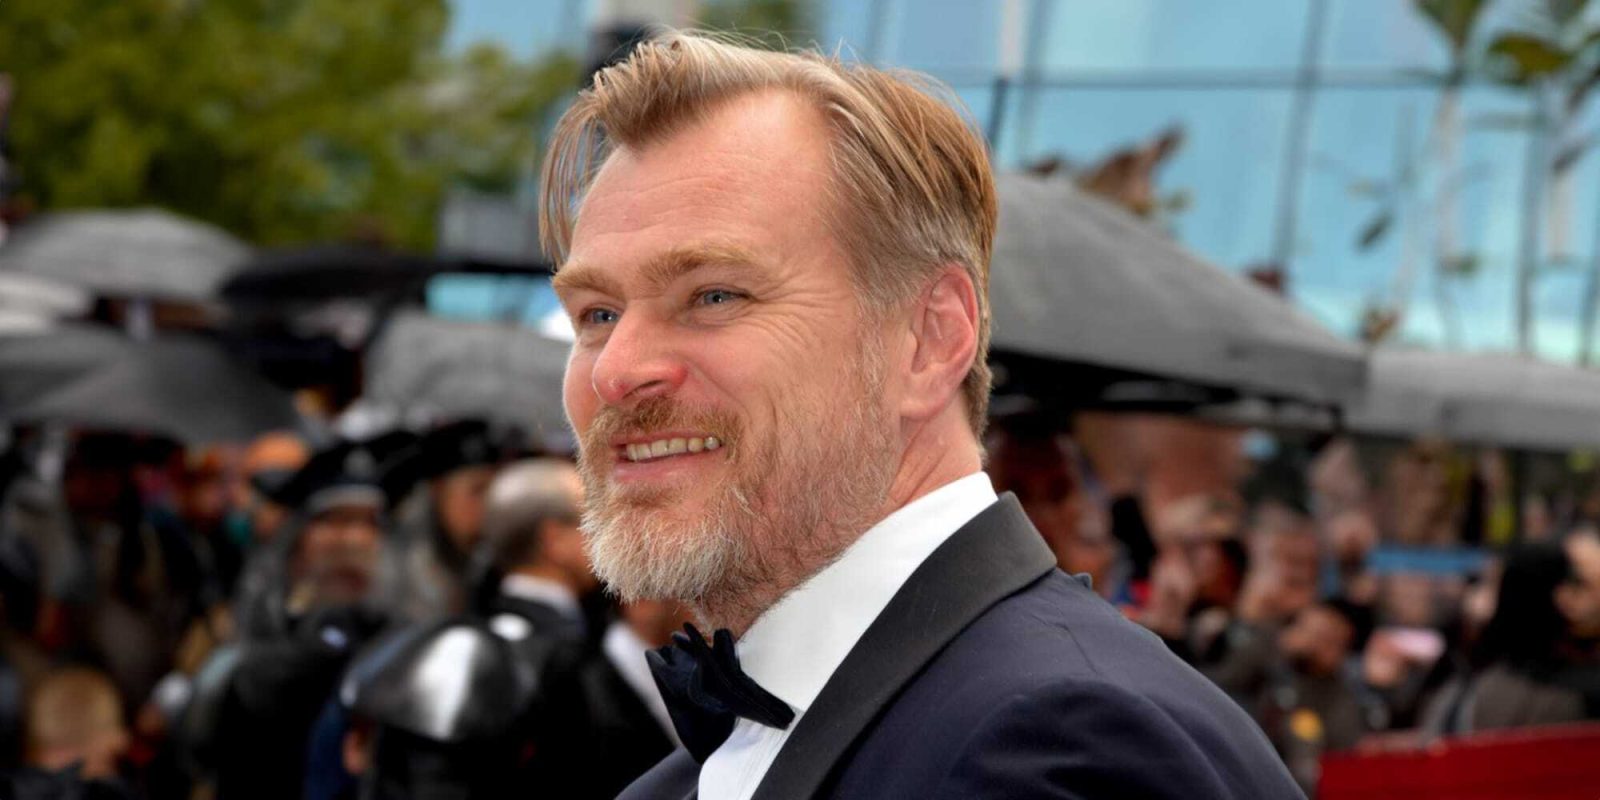 Christopher Nolan roasted by Peloton instructor